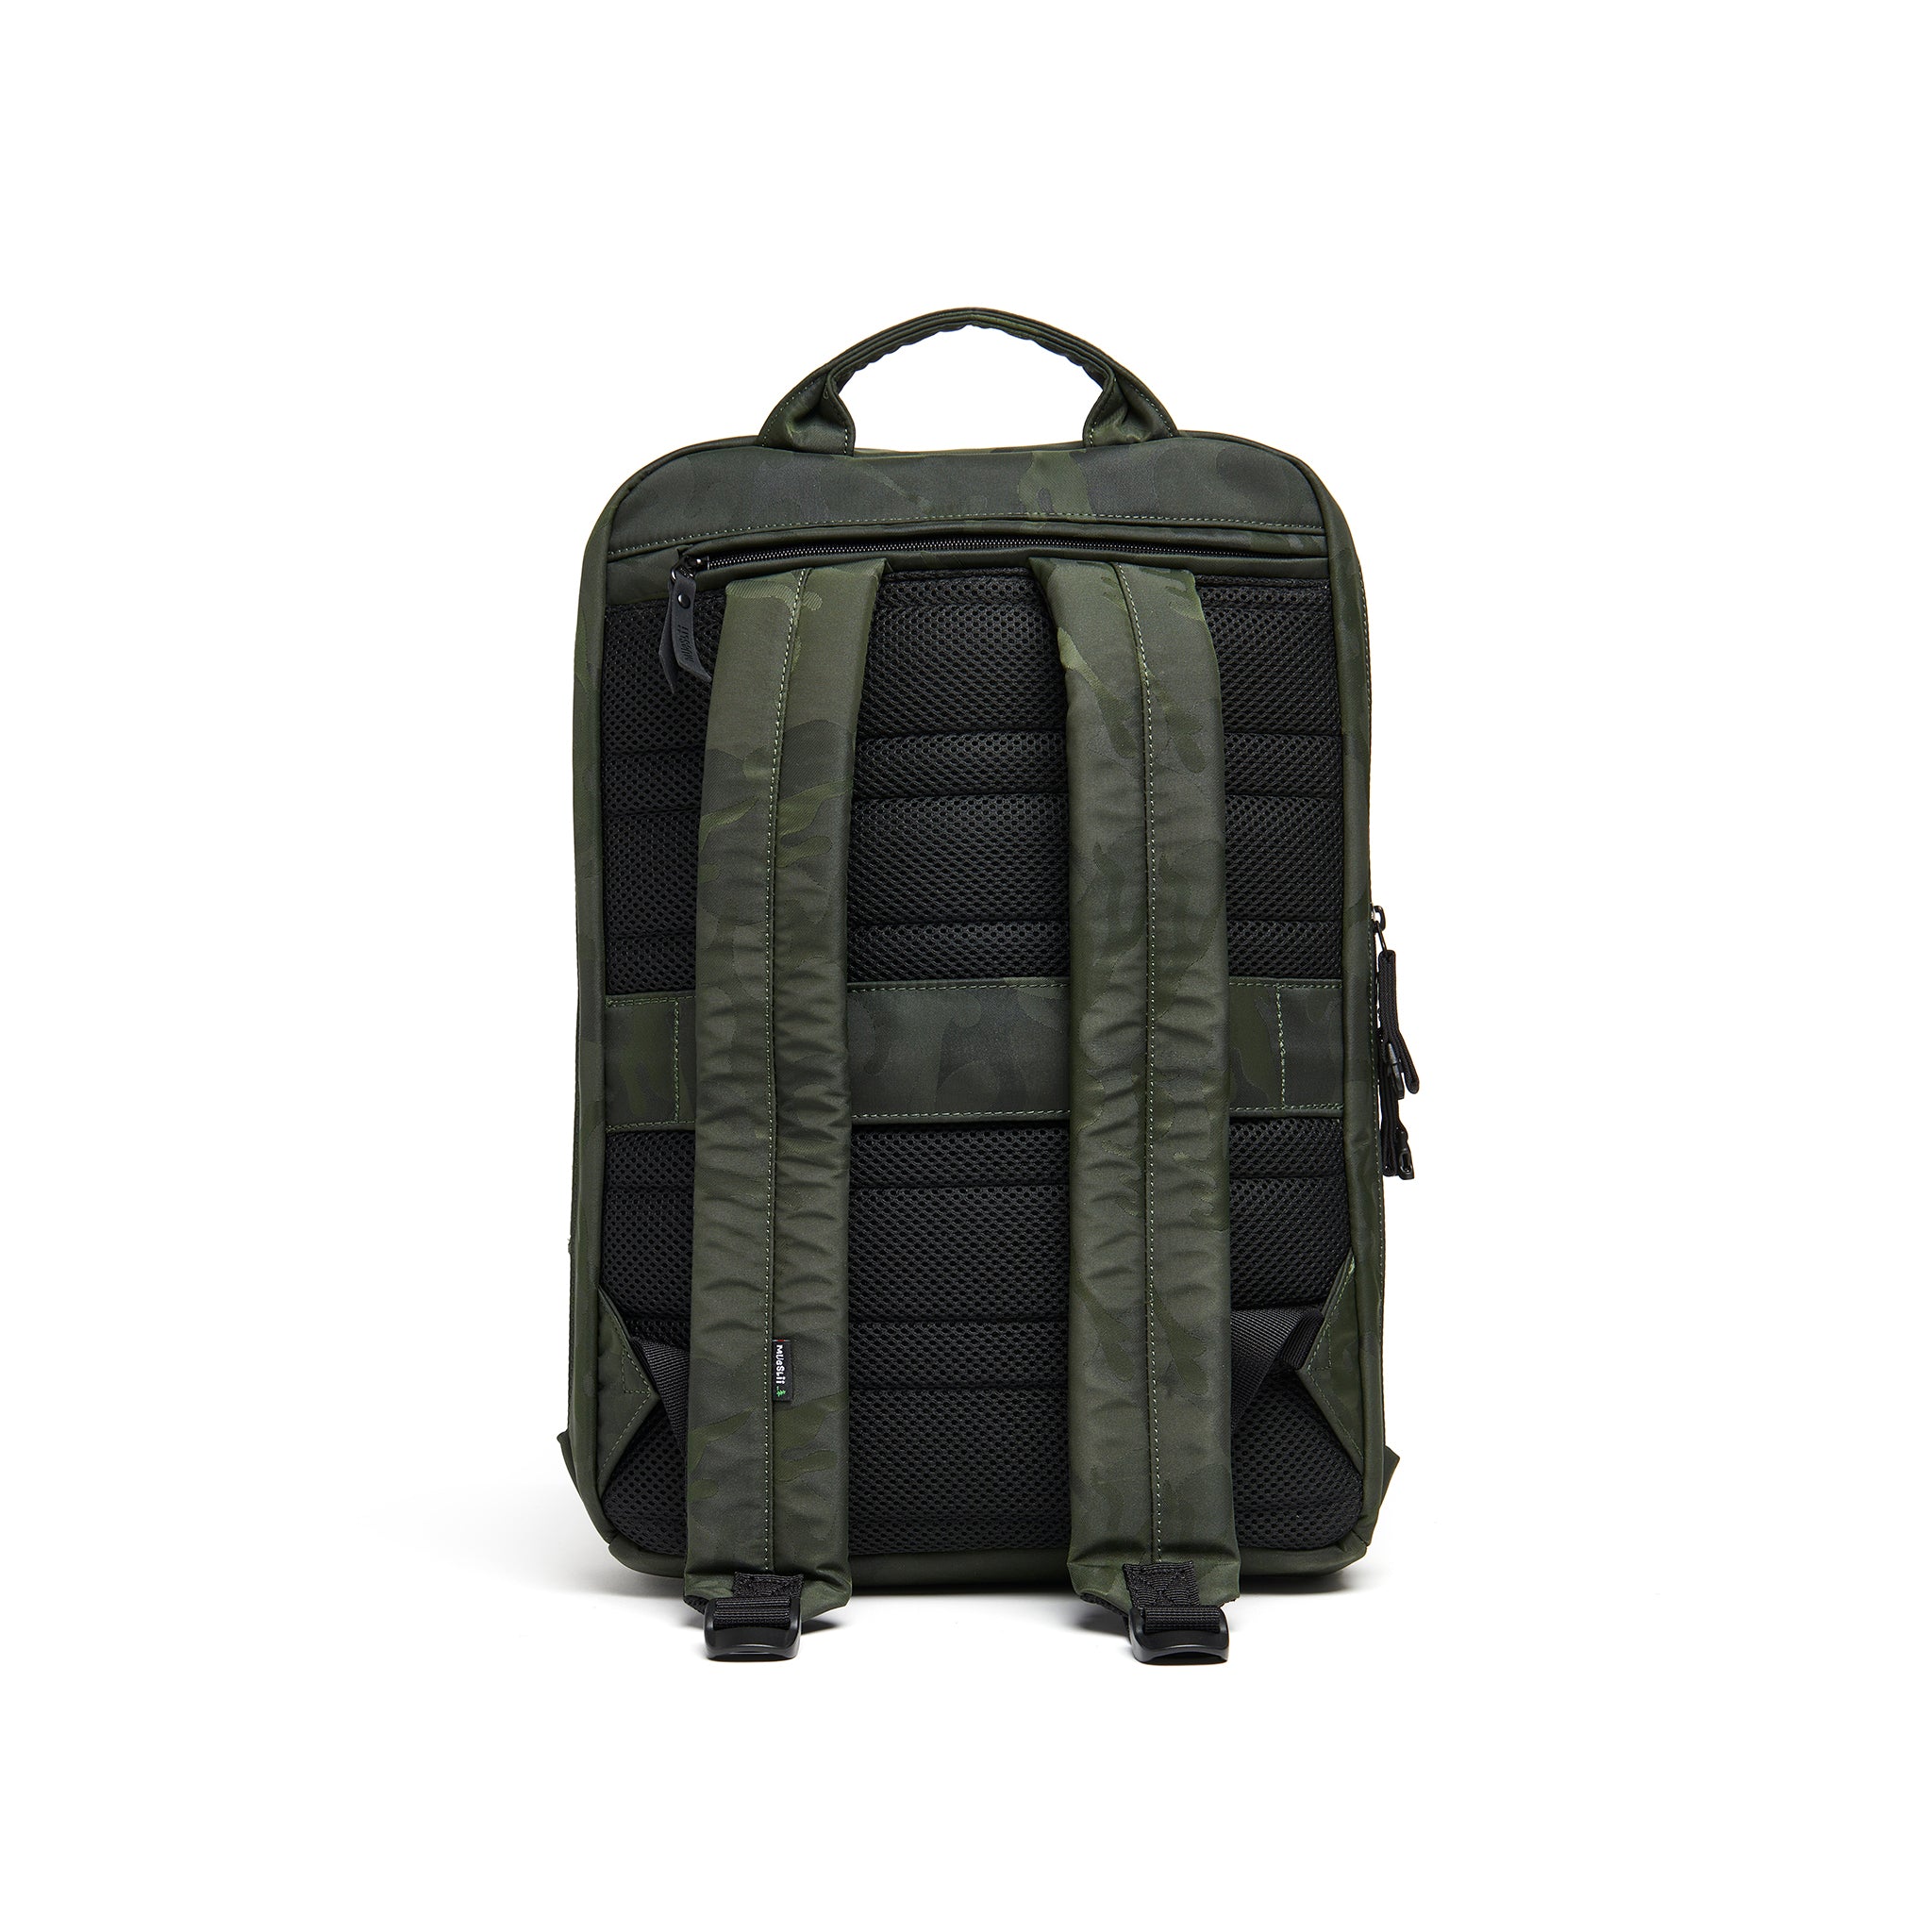 Mueslii daily backpack, made of jacquard  waterproof nylon, camouflage pattern, with a laptop compartment, color green, back view.